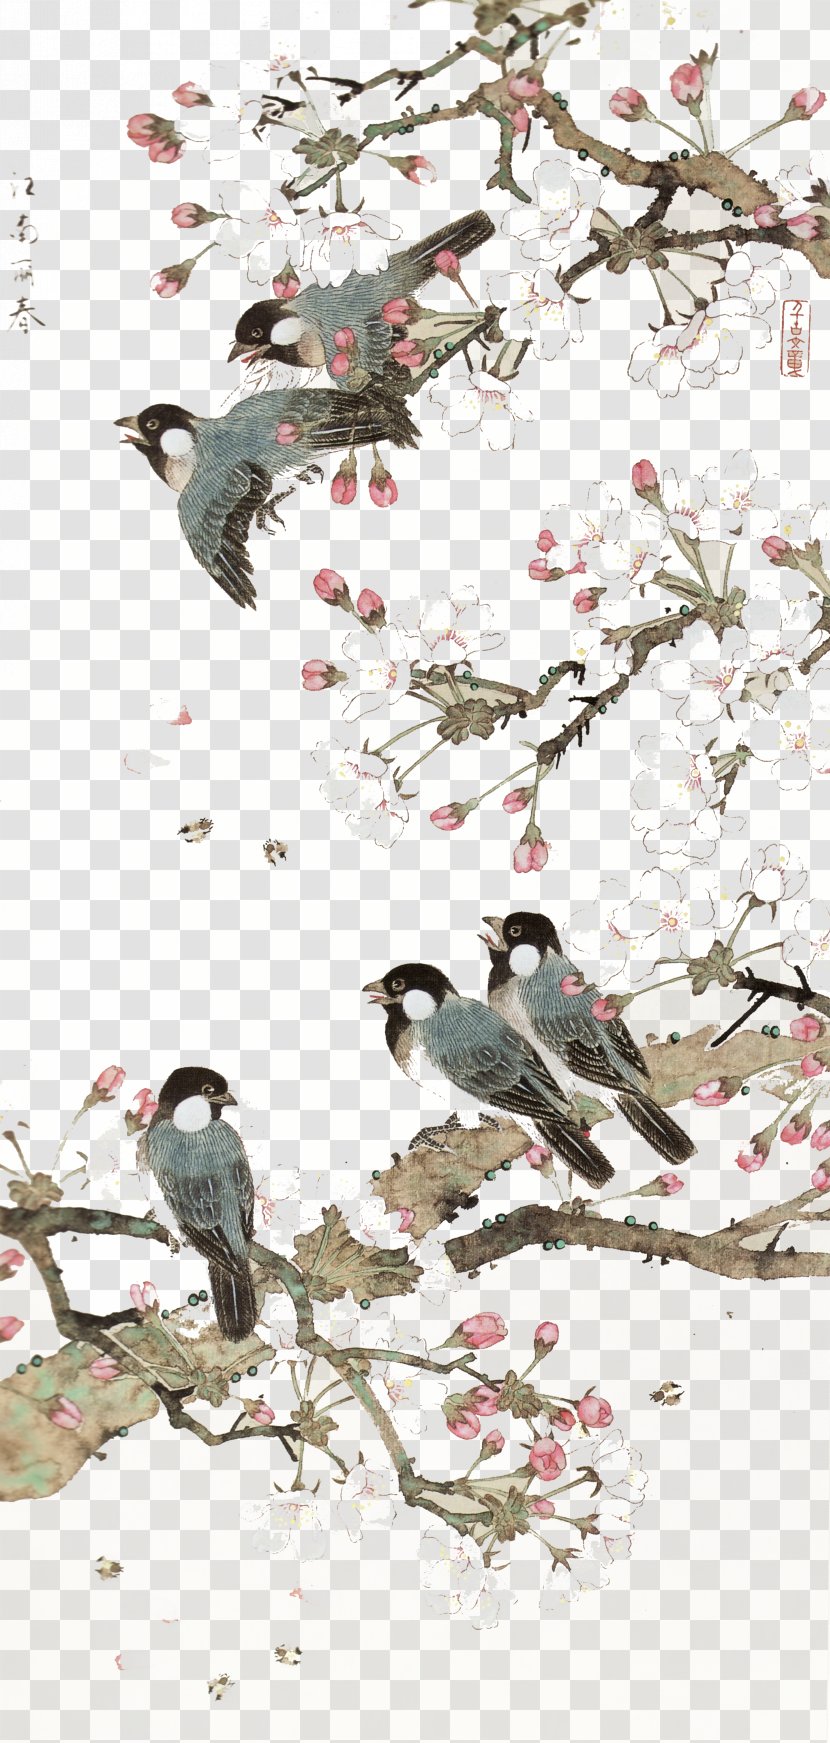 China Bird-and-flower Painting Chinese Art - Bird Background Transparent PNG